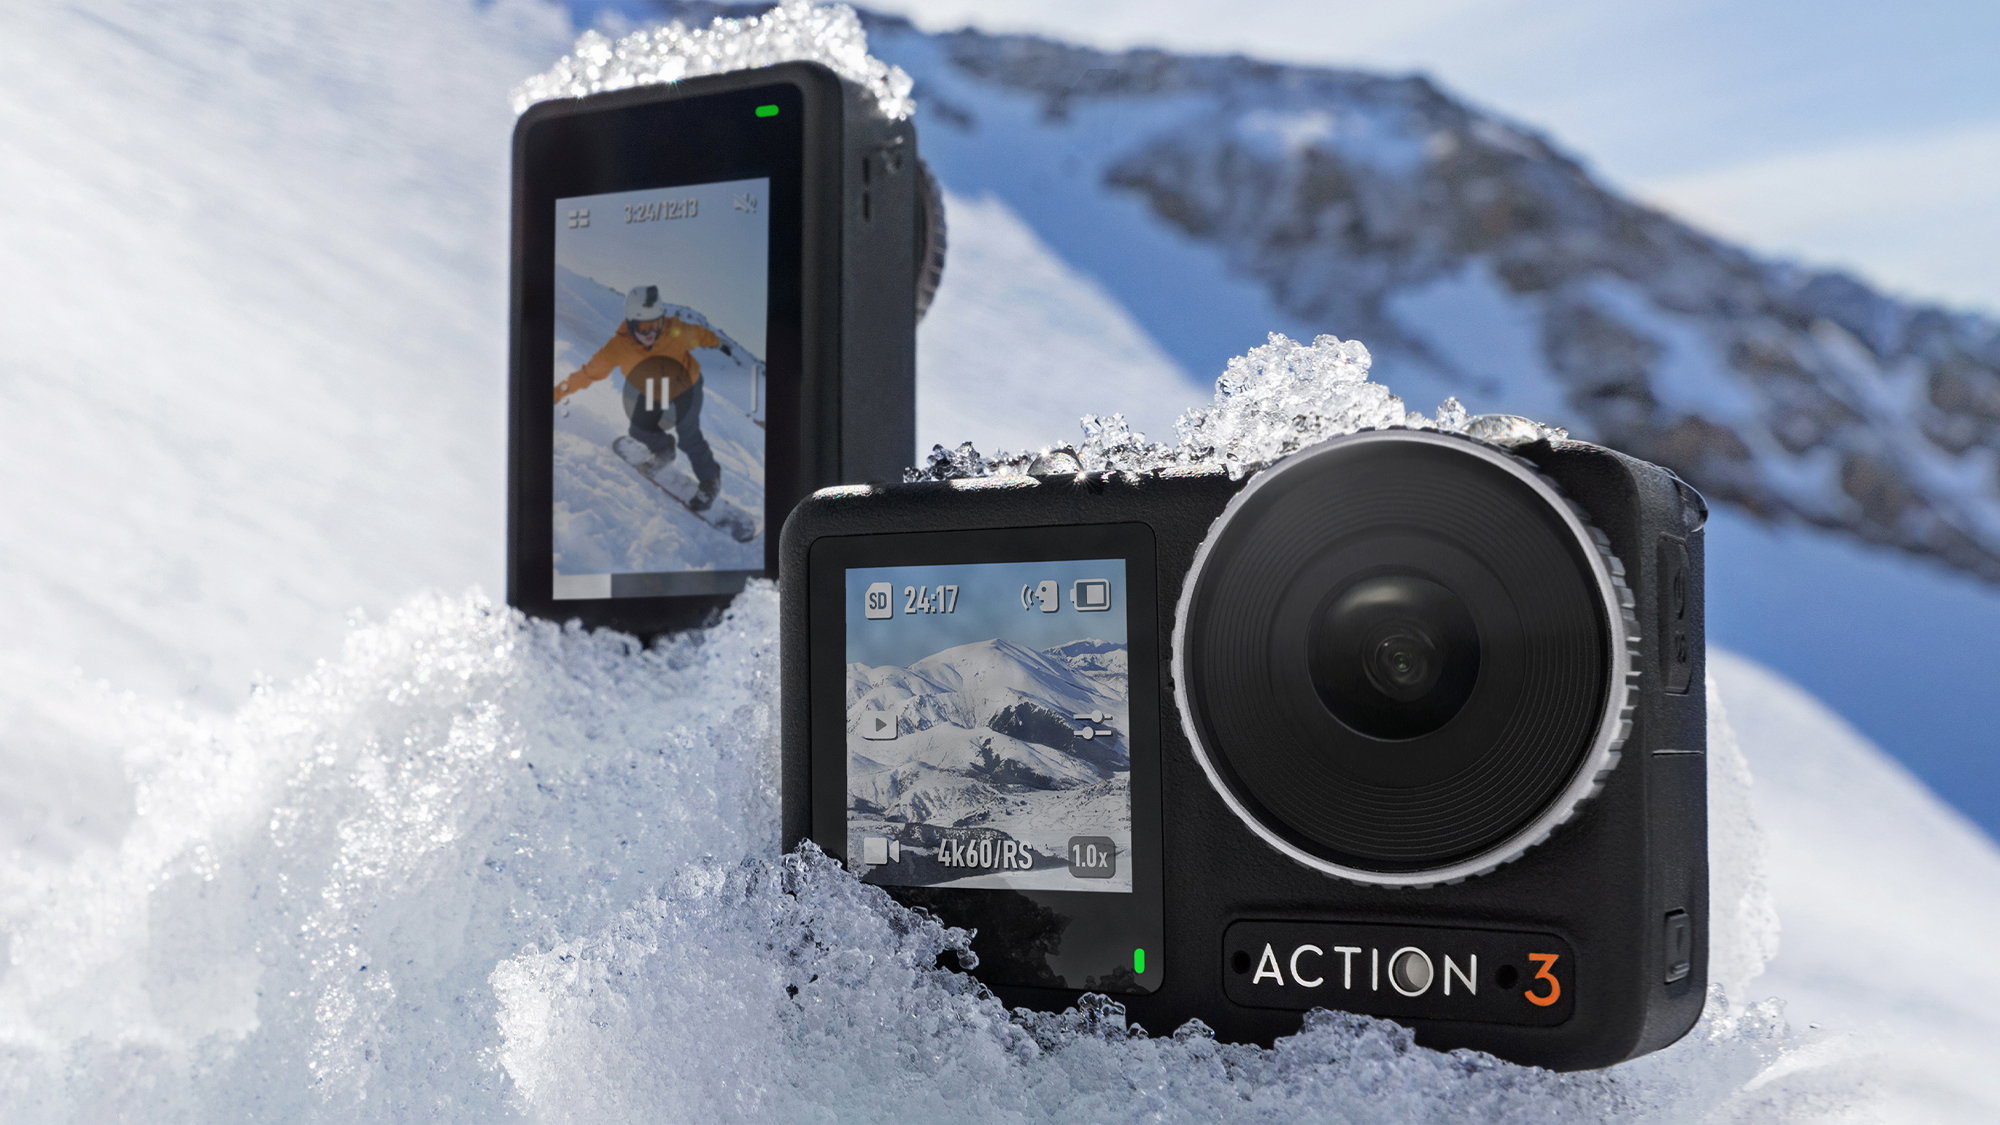 DJI Osmo Action 4 Vs GoPro Hero 11 Black: Which Is Better?